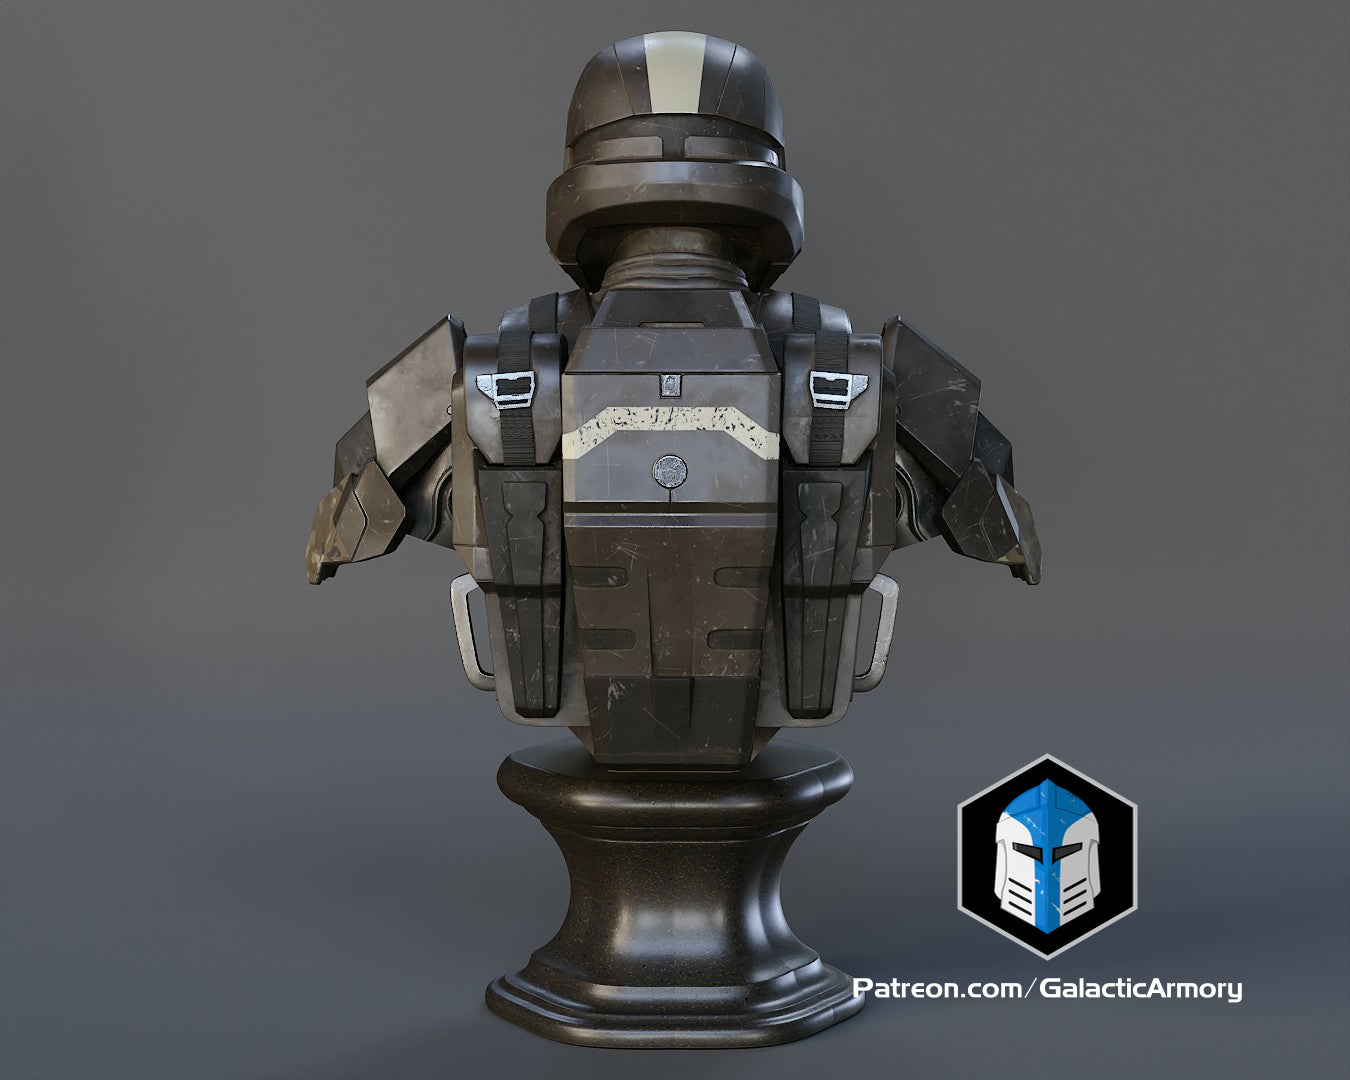 Halo ODST Bust - 3D Print Files